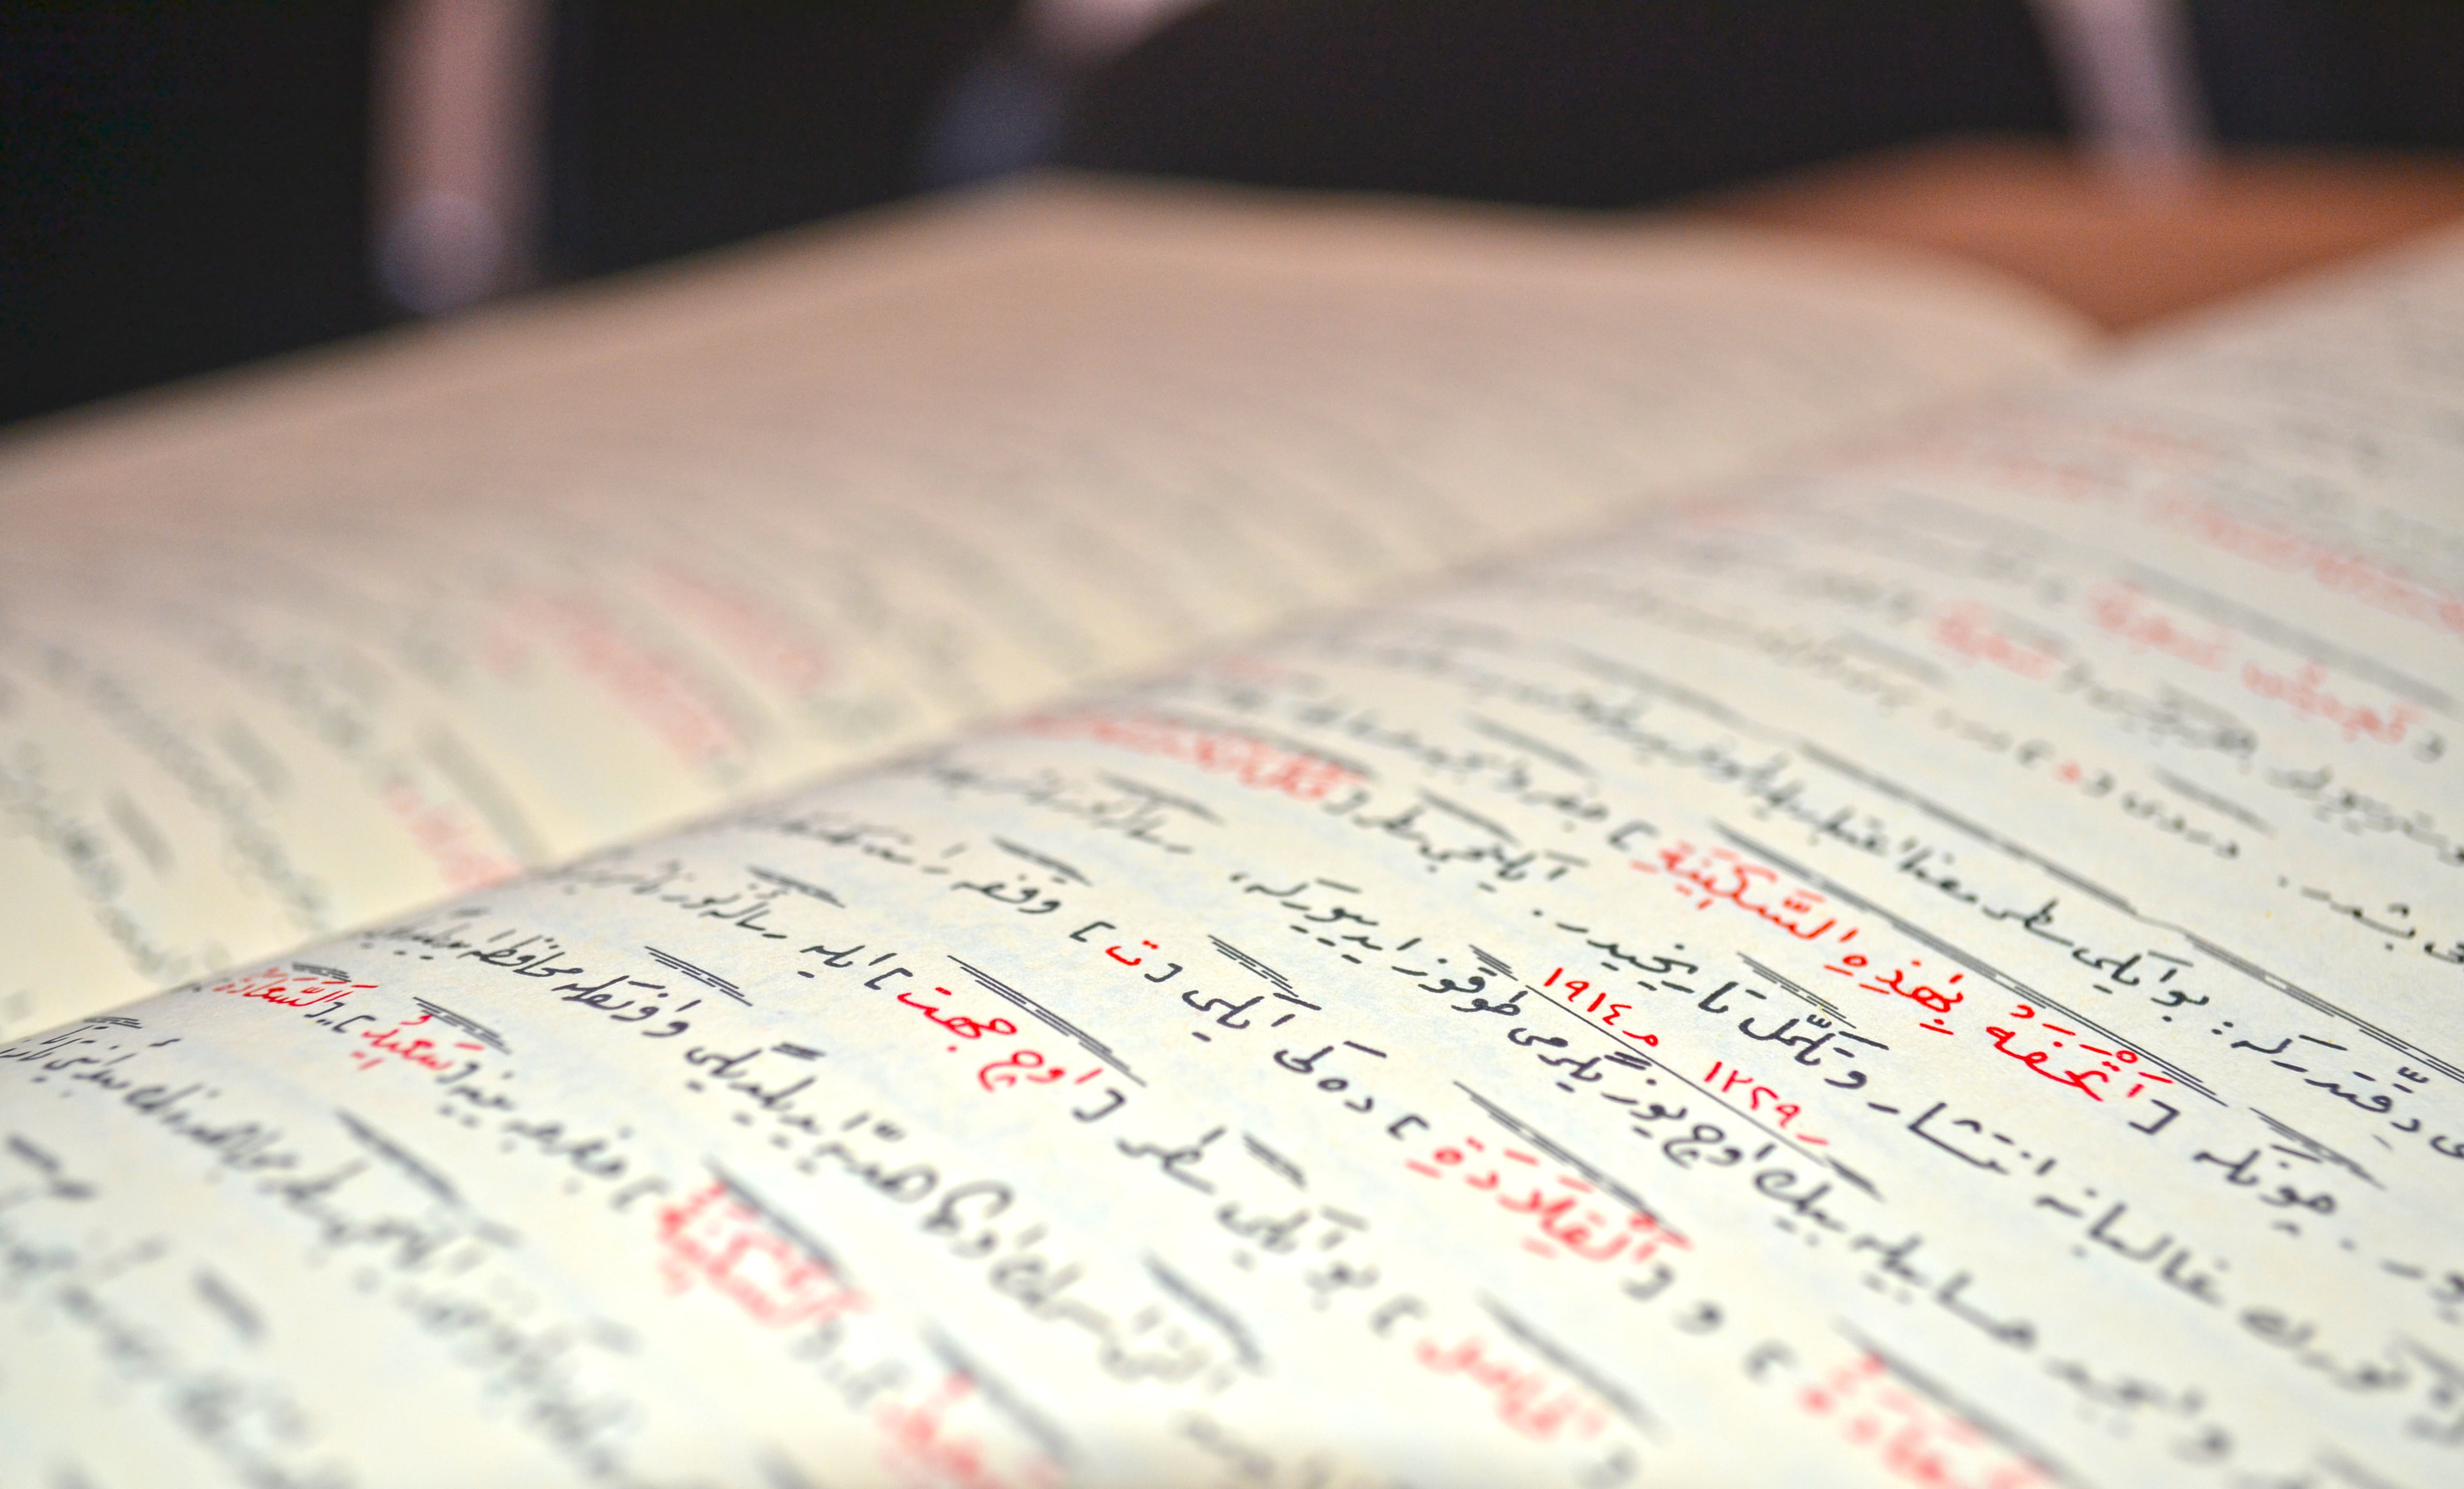 opened book with handwriting, quran, arabic, islam, text, selective focus